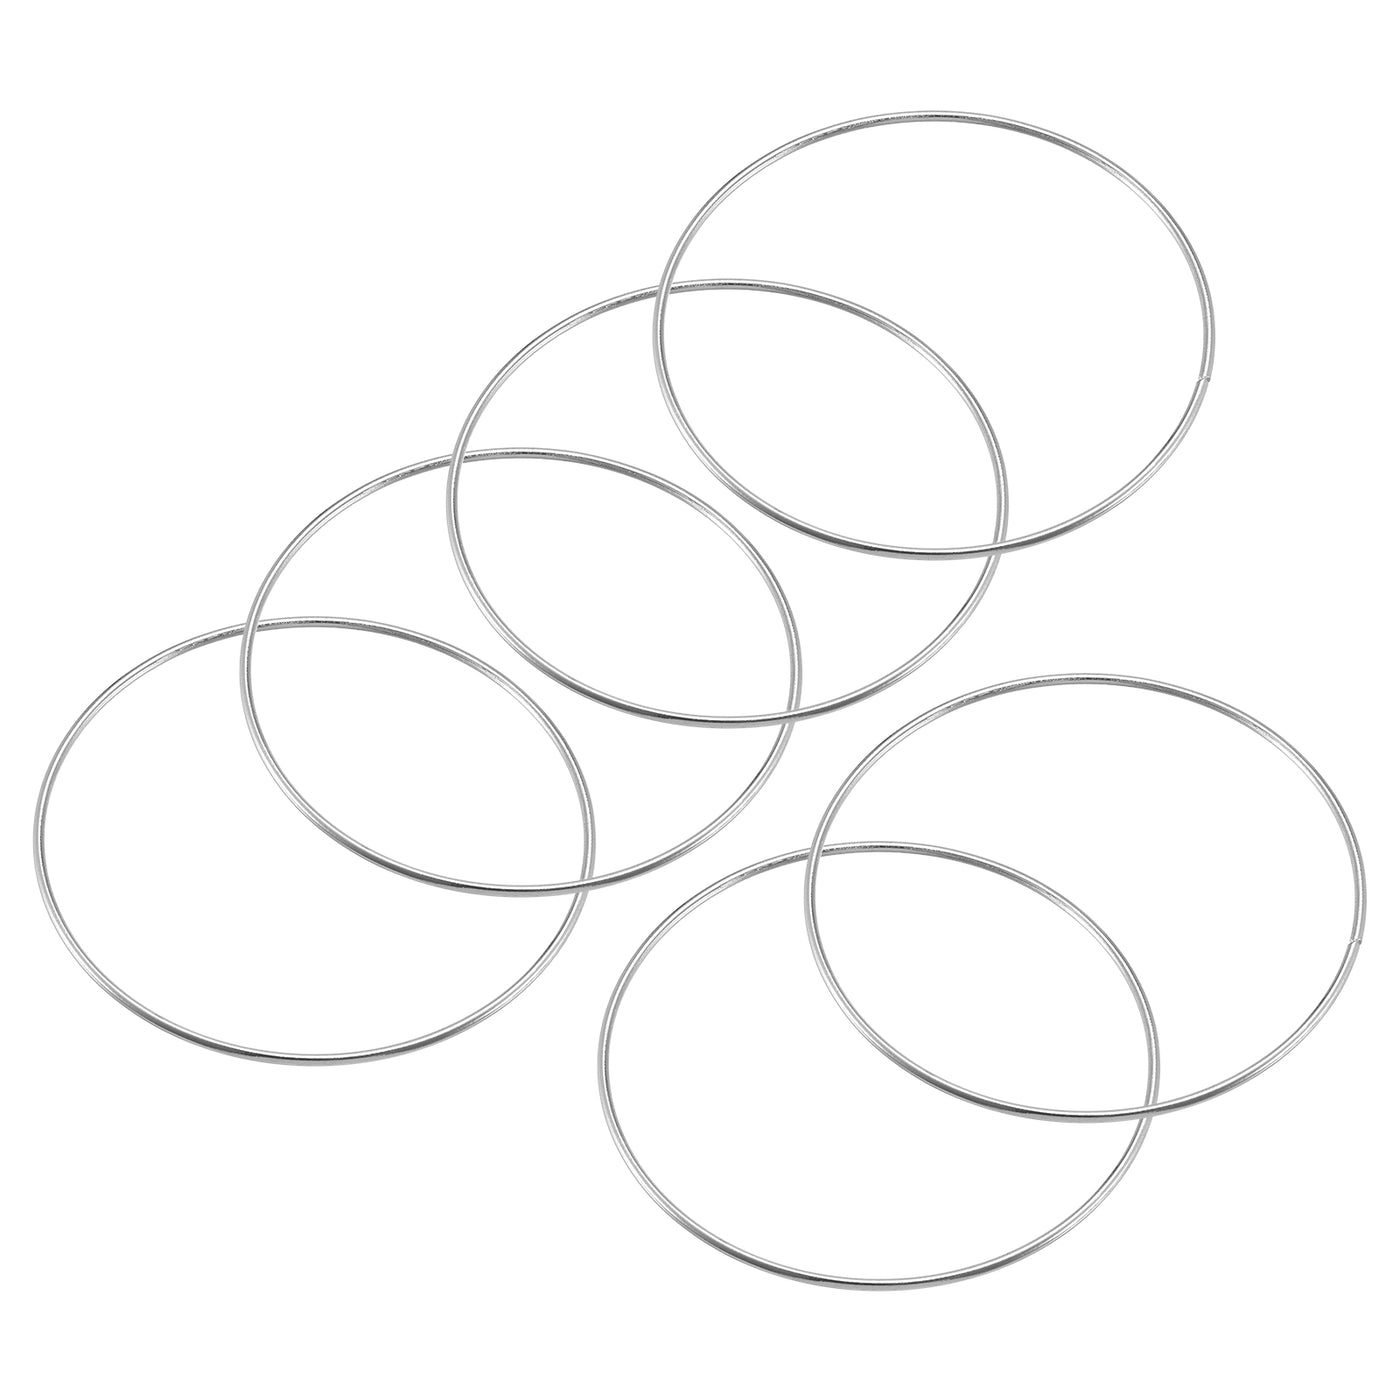 uxcell Uxcell 120mm(4.72") OD Metal O Ring Non-Welded Craft Hoops for DIY Silver Tone 6pcs